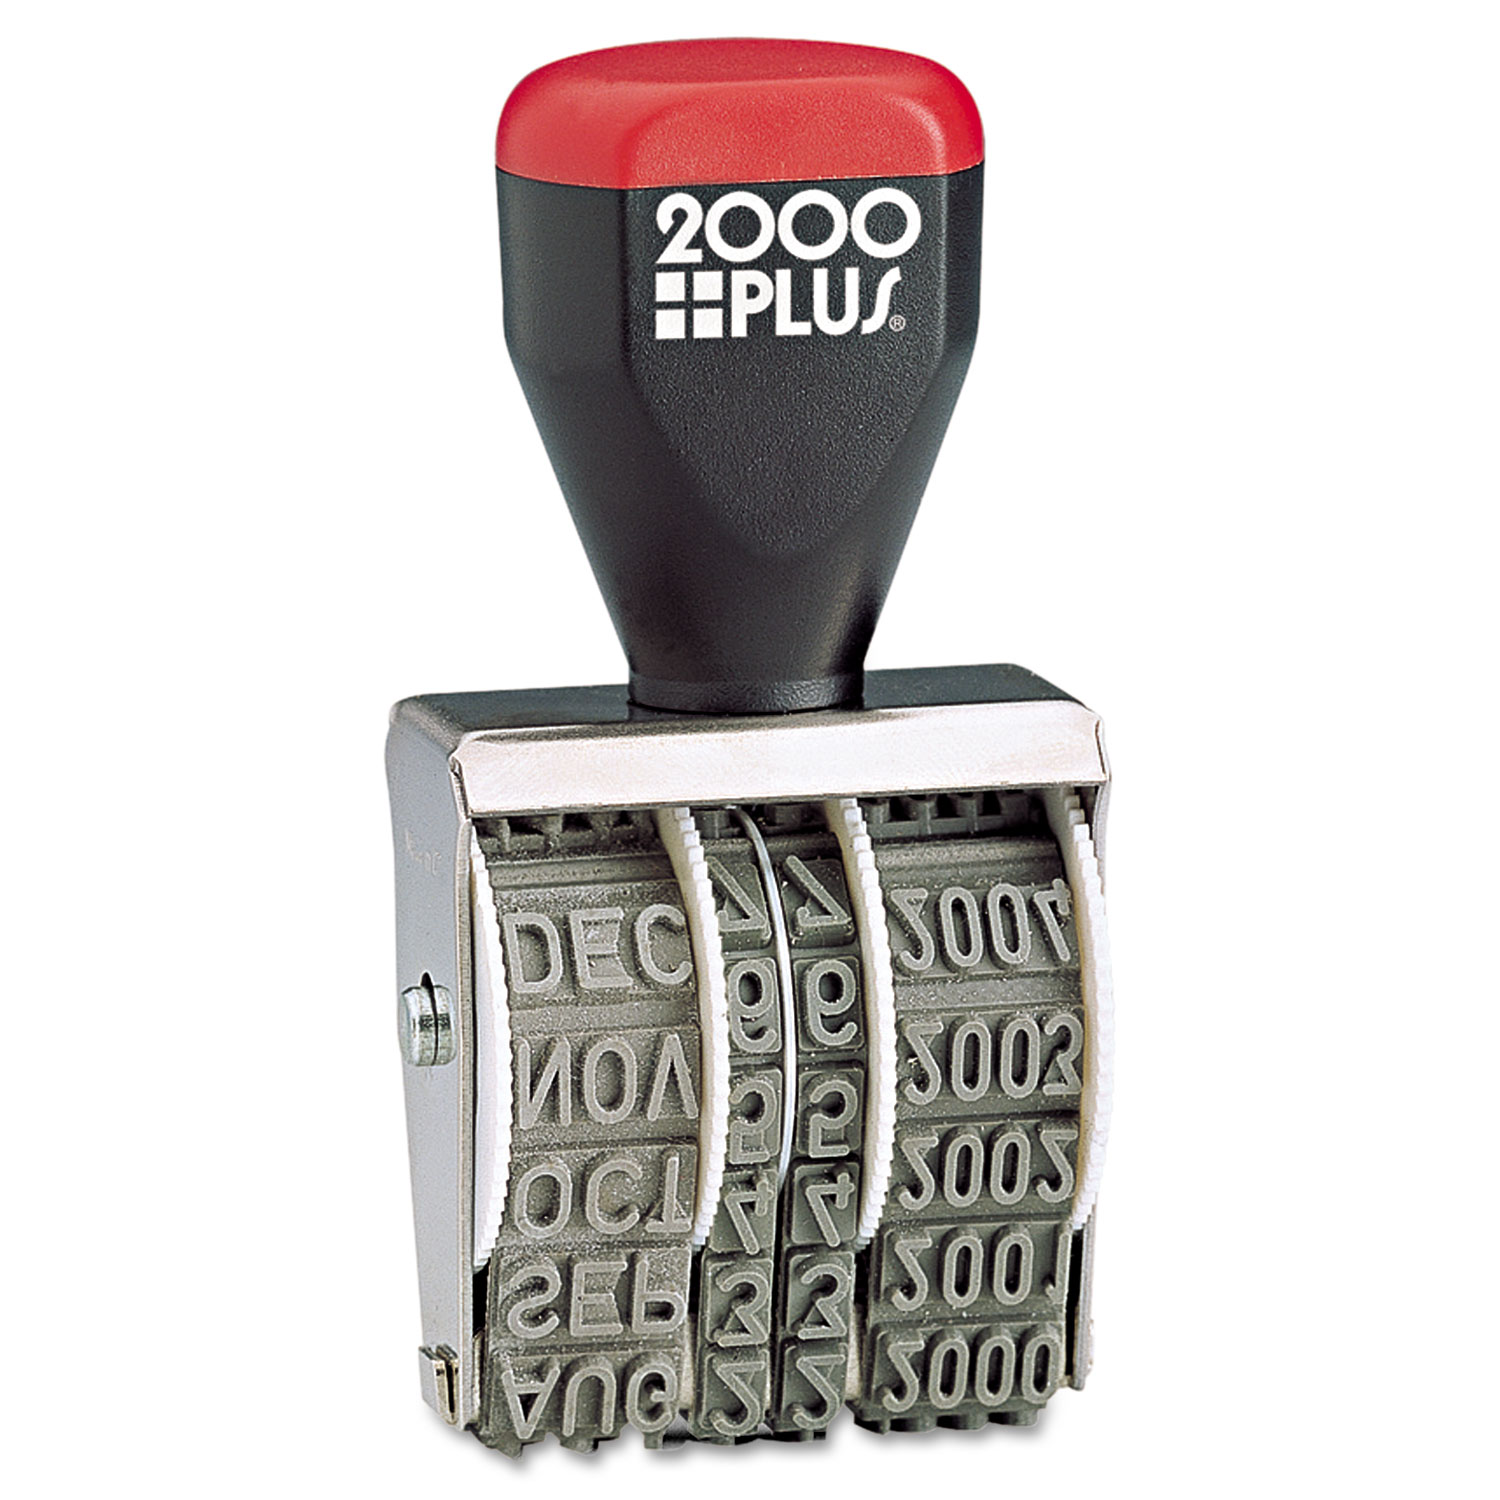 COSCO 2000 Plus Four-band Date Stamp - image 3 of 3